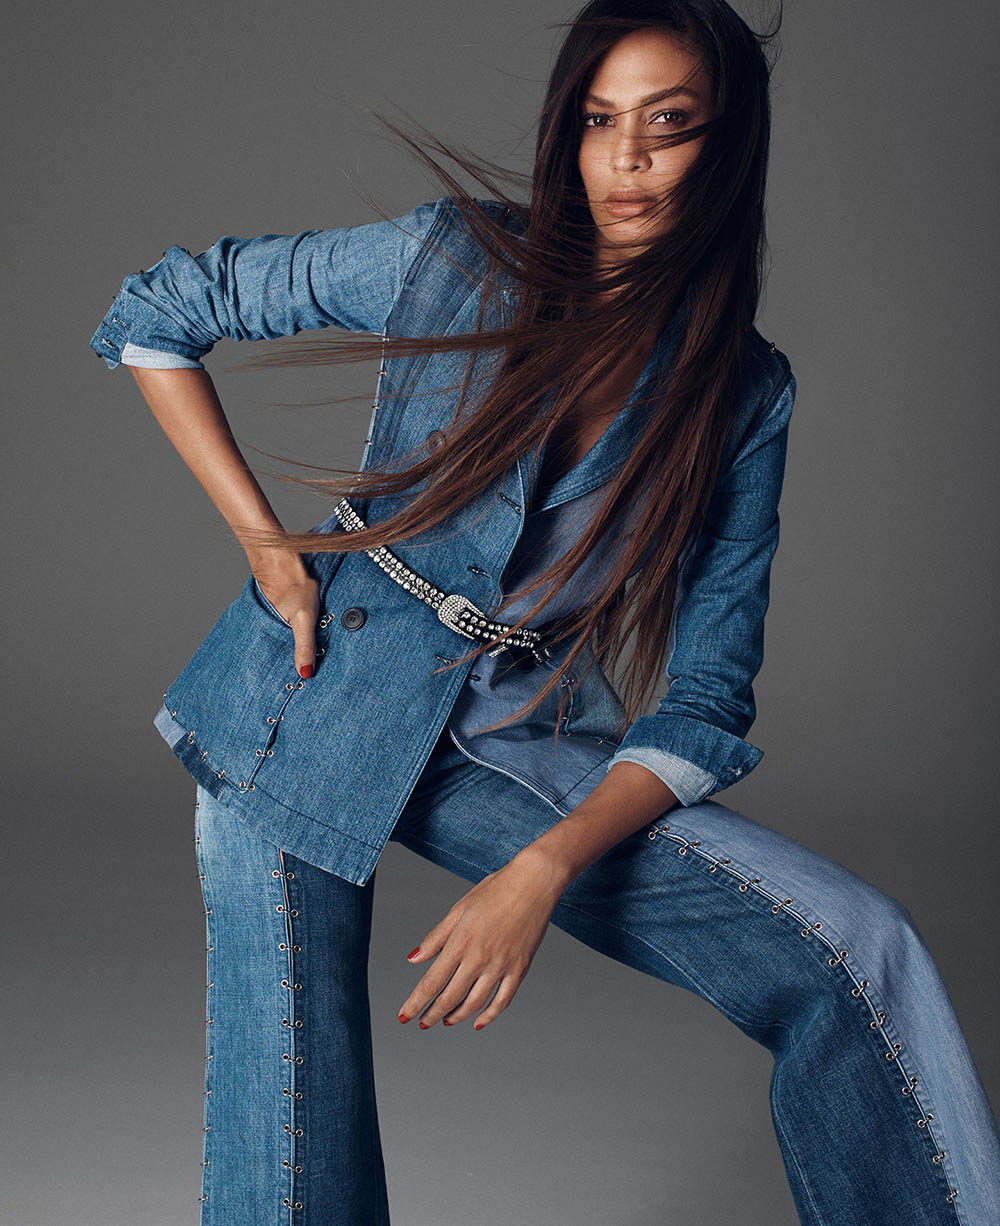 Joan Smalls by Alexi Lubomirski for Elle US April 2018